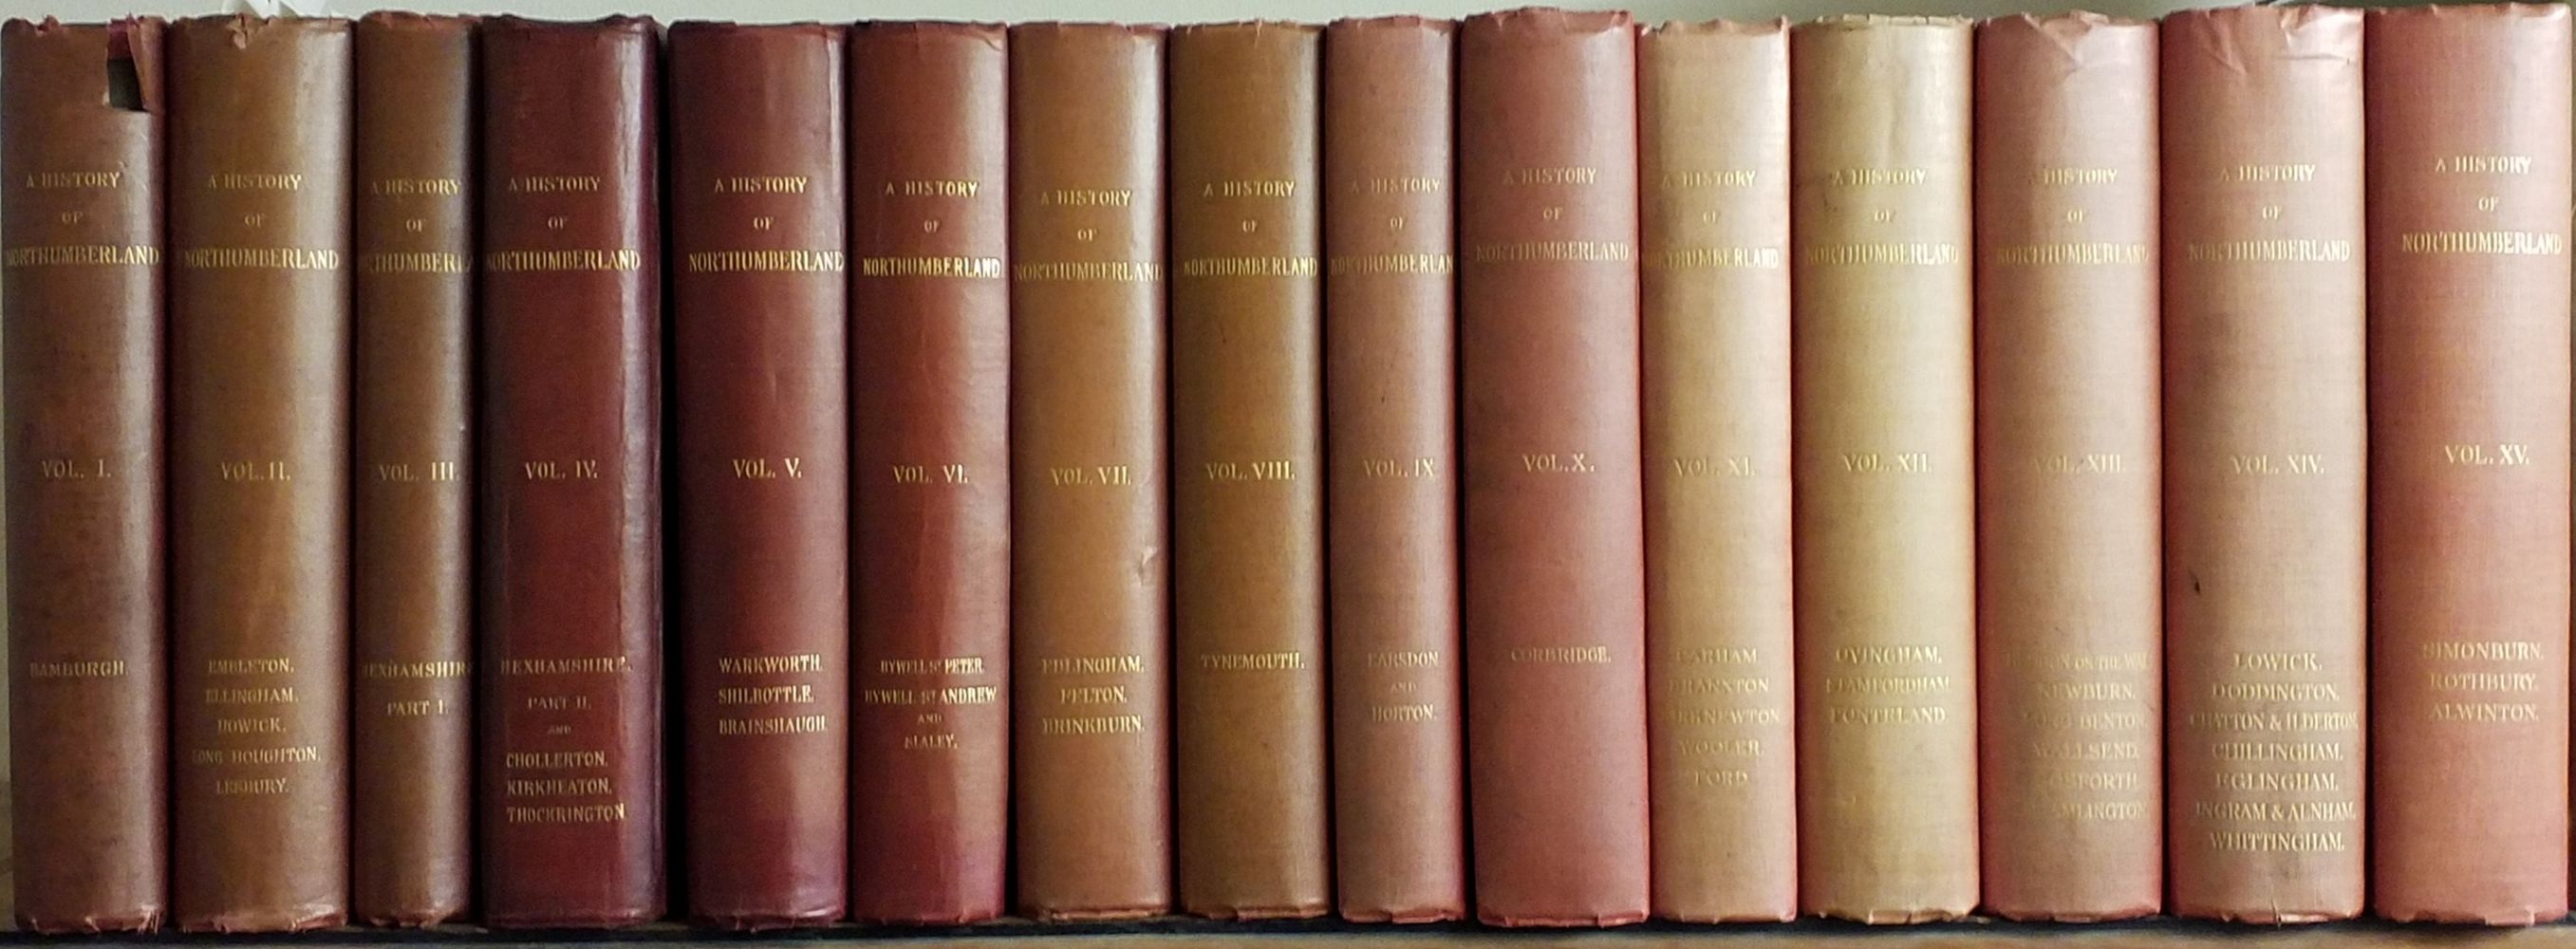 Andrew Reid & Sons [publisher]. A History of Northumberland, 15 volumes, Newcastle-Upon-Tyne, - Image 2 of 2